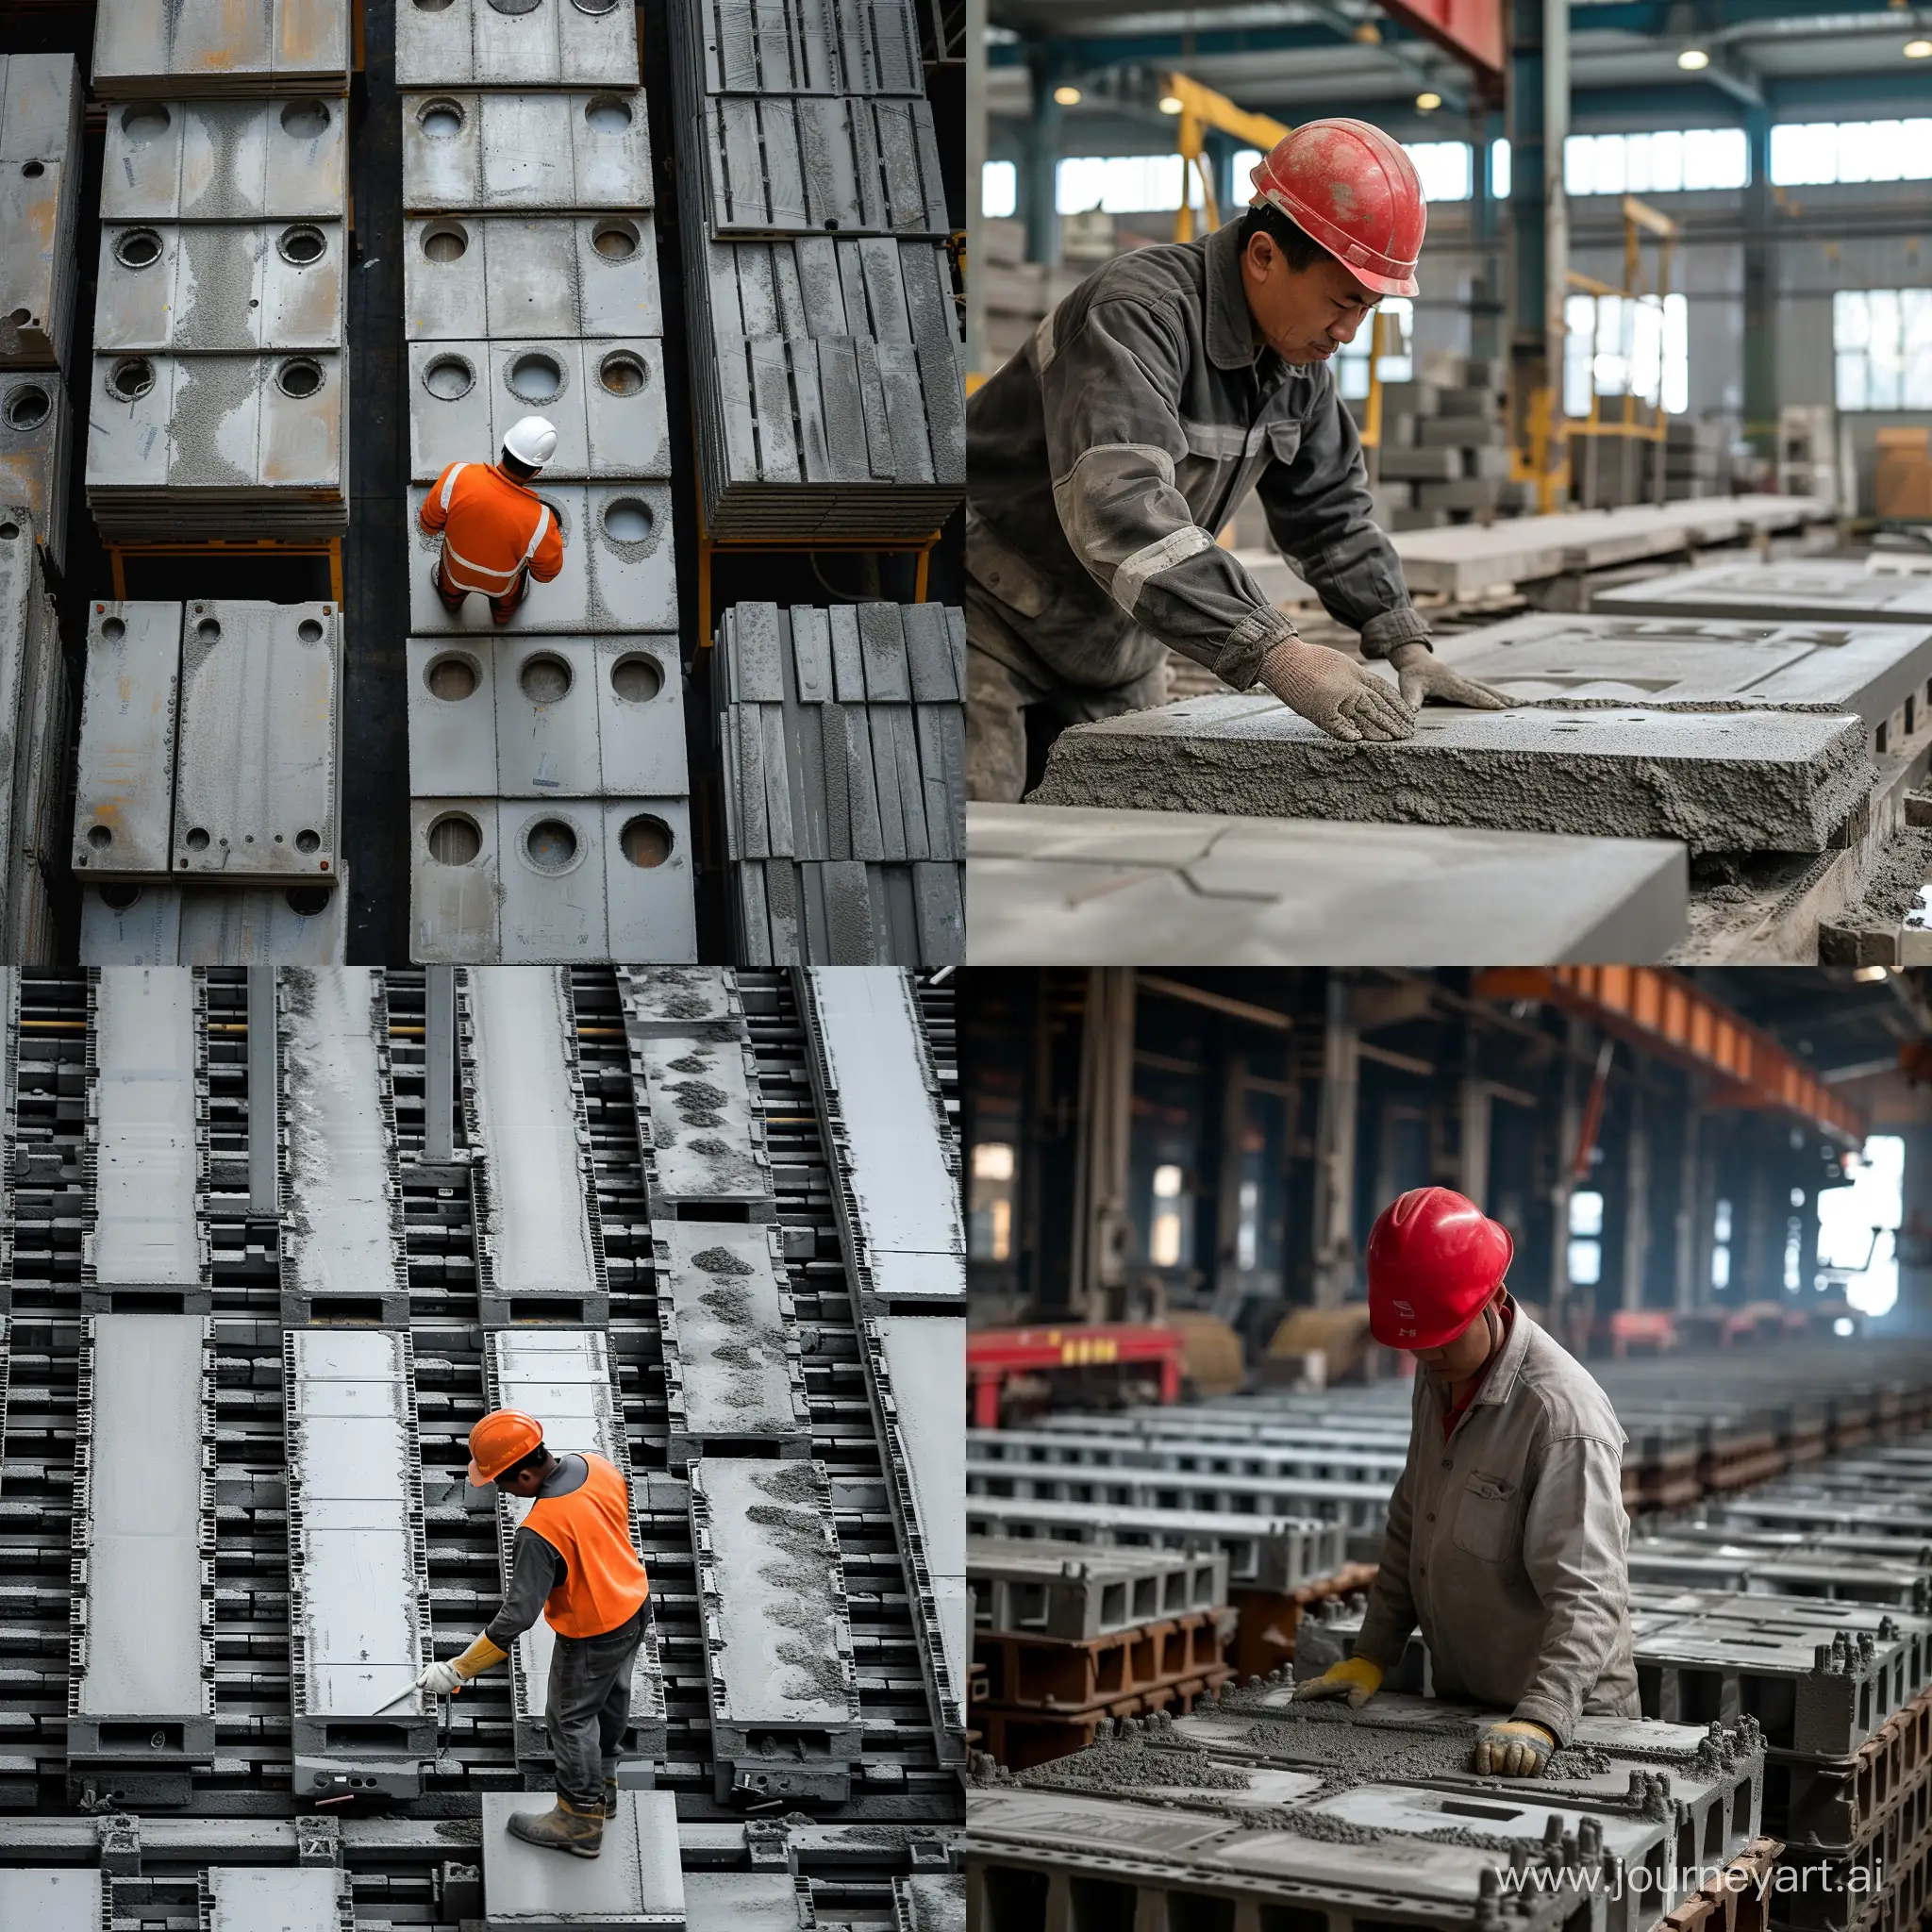 Skyscraper-Construction-Workers-Forming-Concrete-Slabs-at-Factory